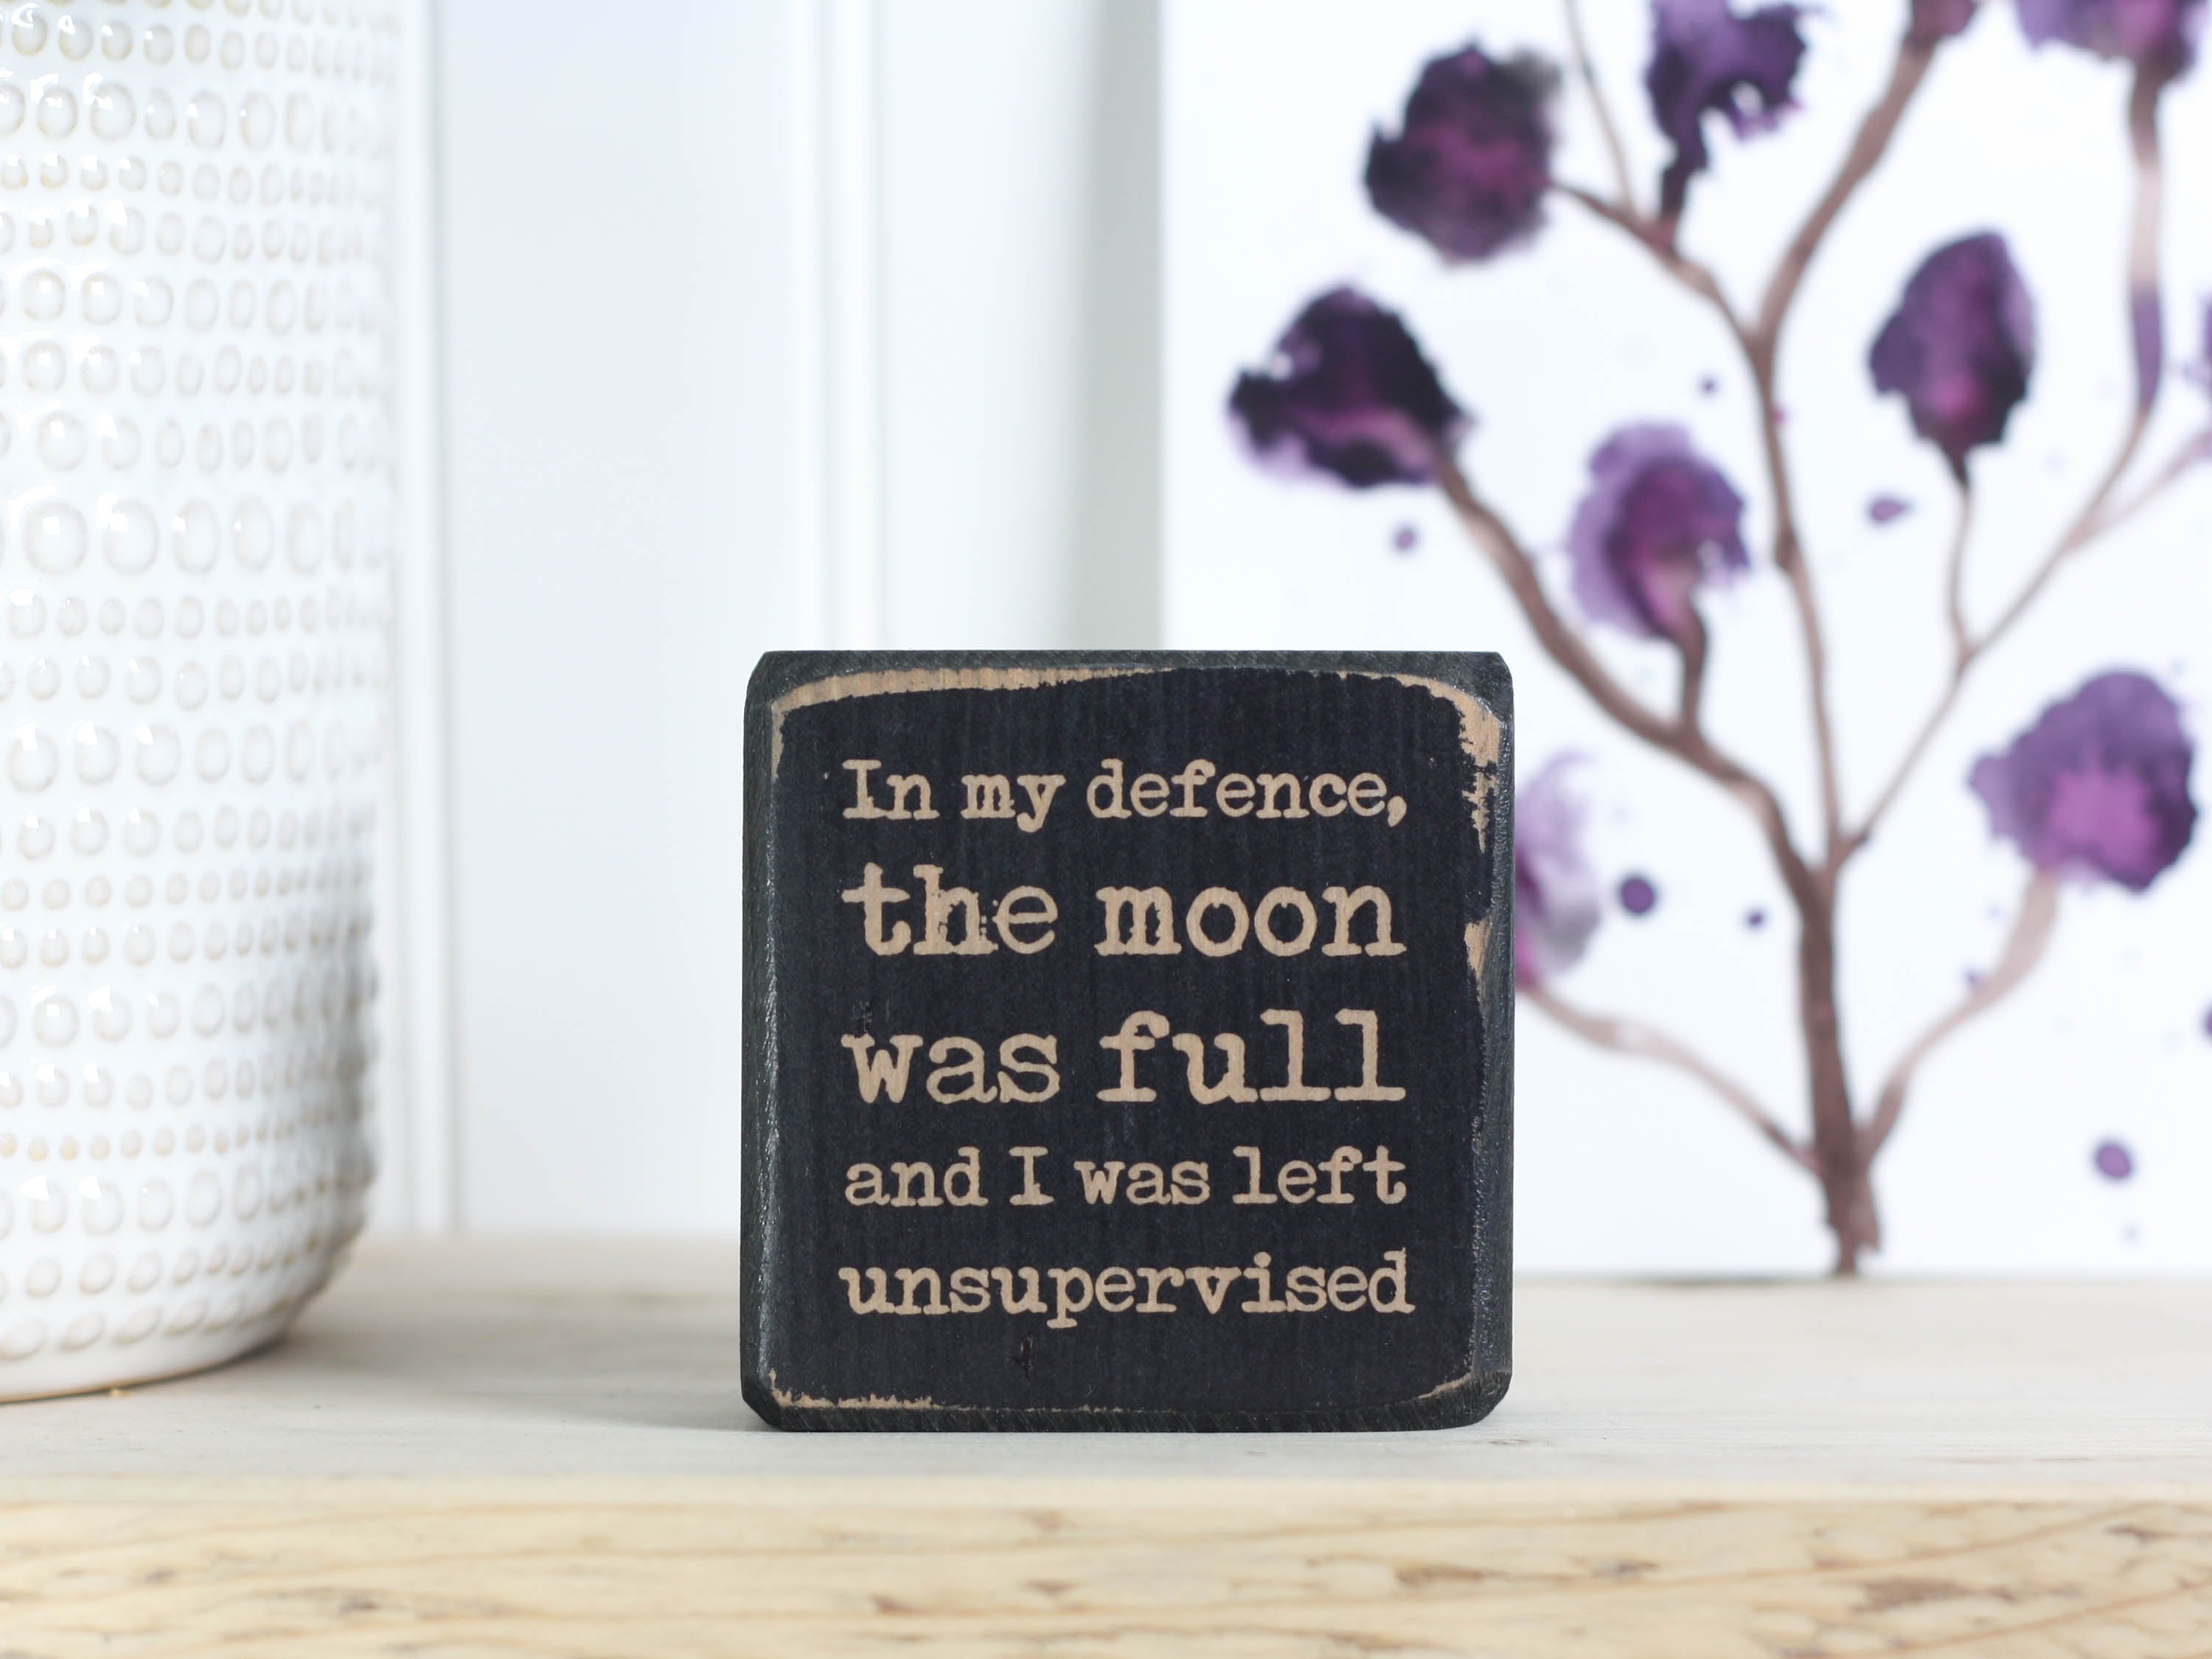 Small wood sign in distressed black with the saying "In my defense, the moon was full and I was left unsupervised."